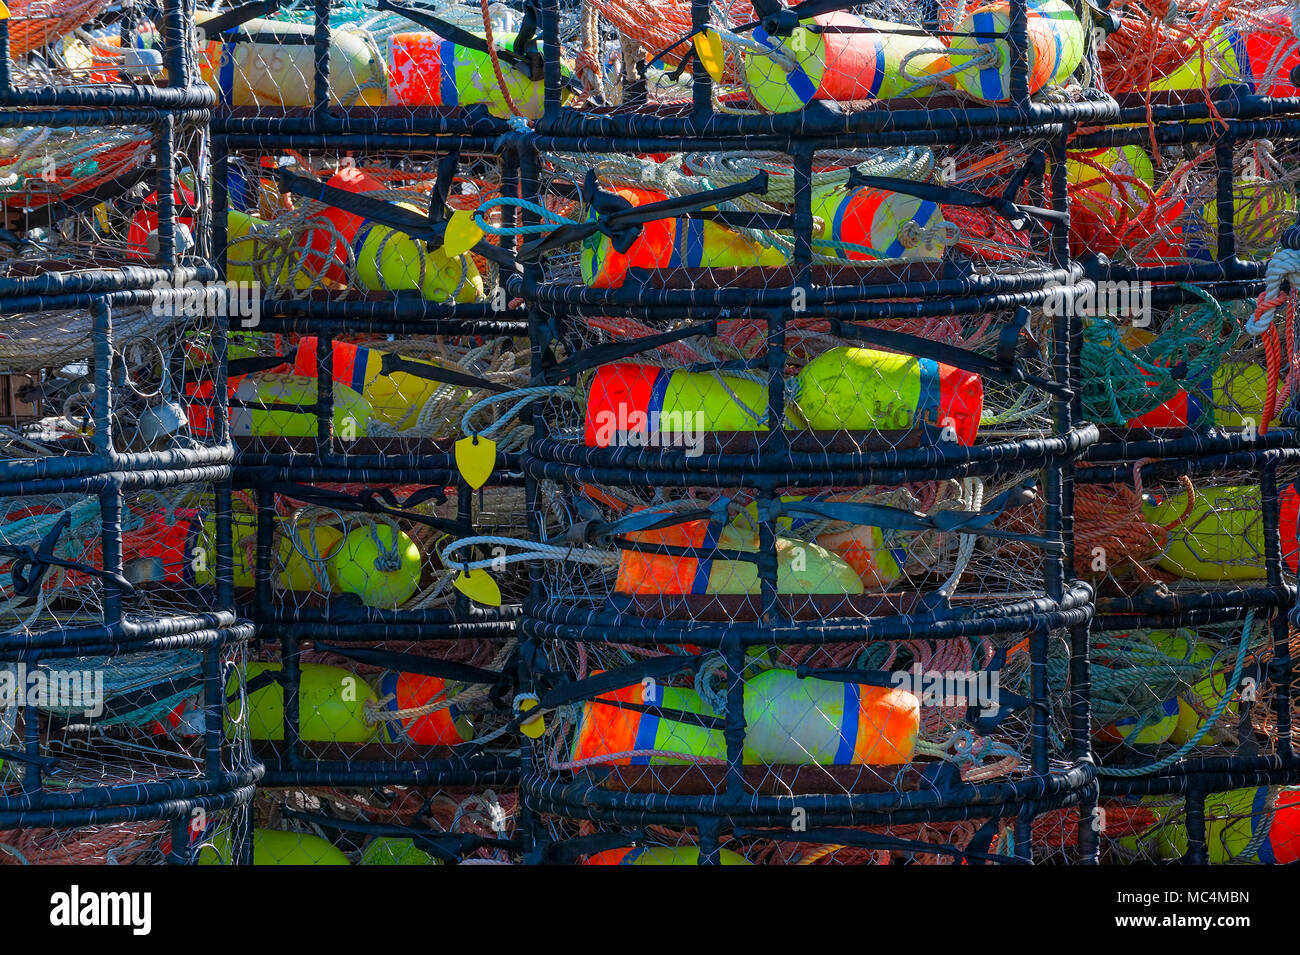 Stacks of Crab Pots sits on Pier in Astoria, Oregon Stock Photo